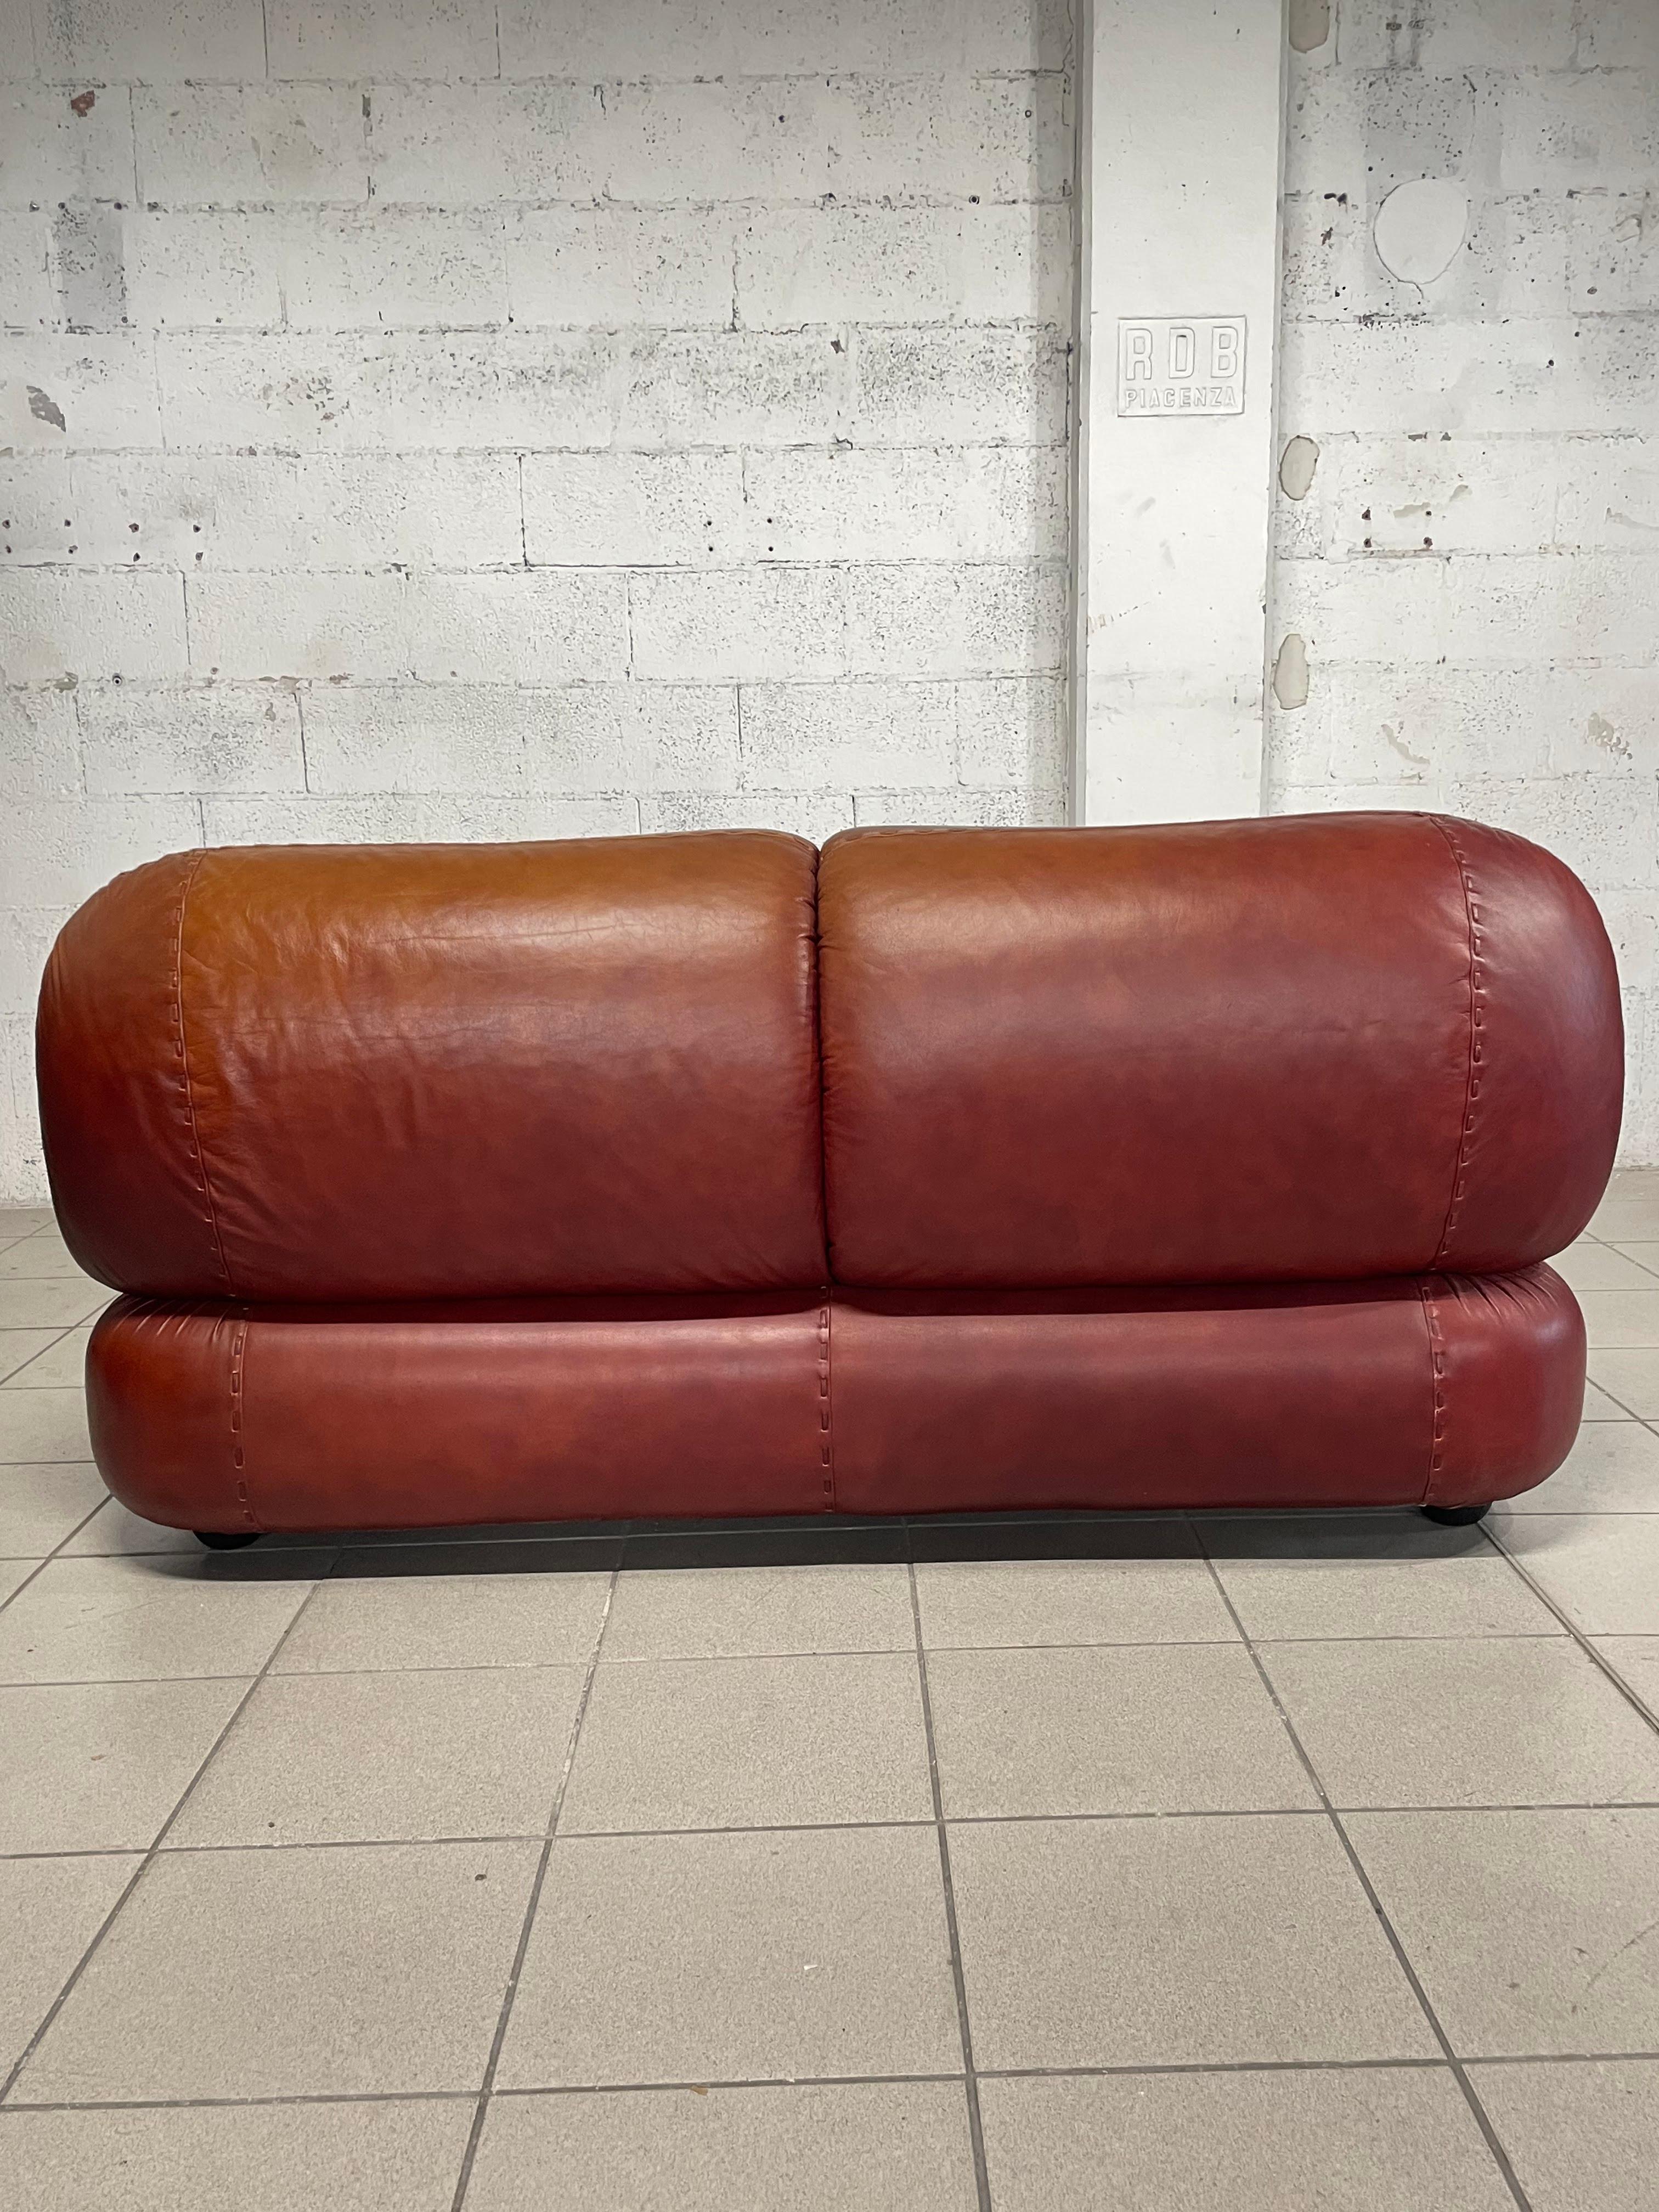 2-seater leather sofa mod. Sapporo by Mobil Girgi Italia, 1970s For Sale 3